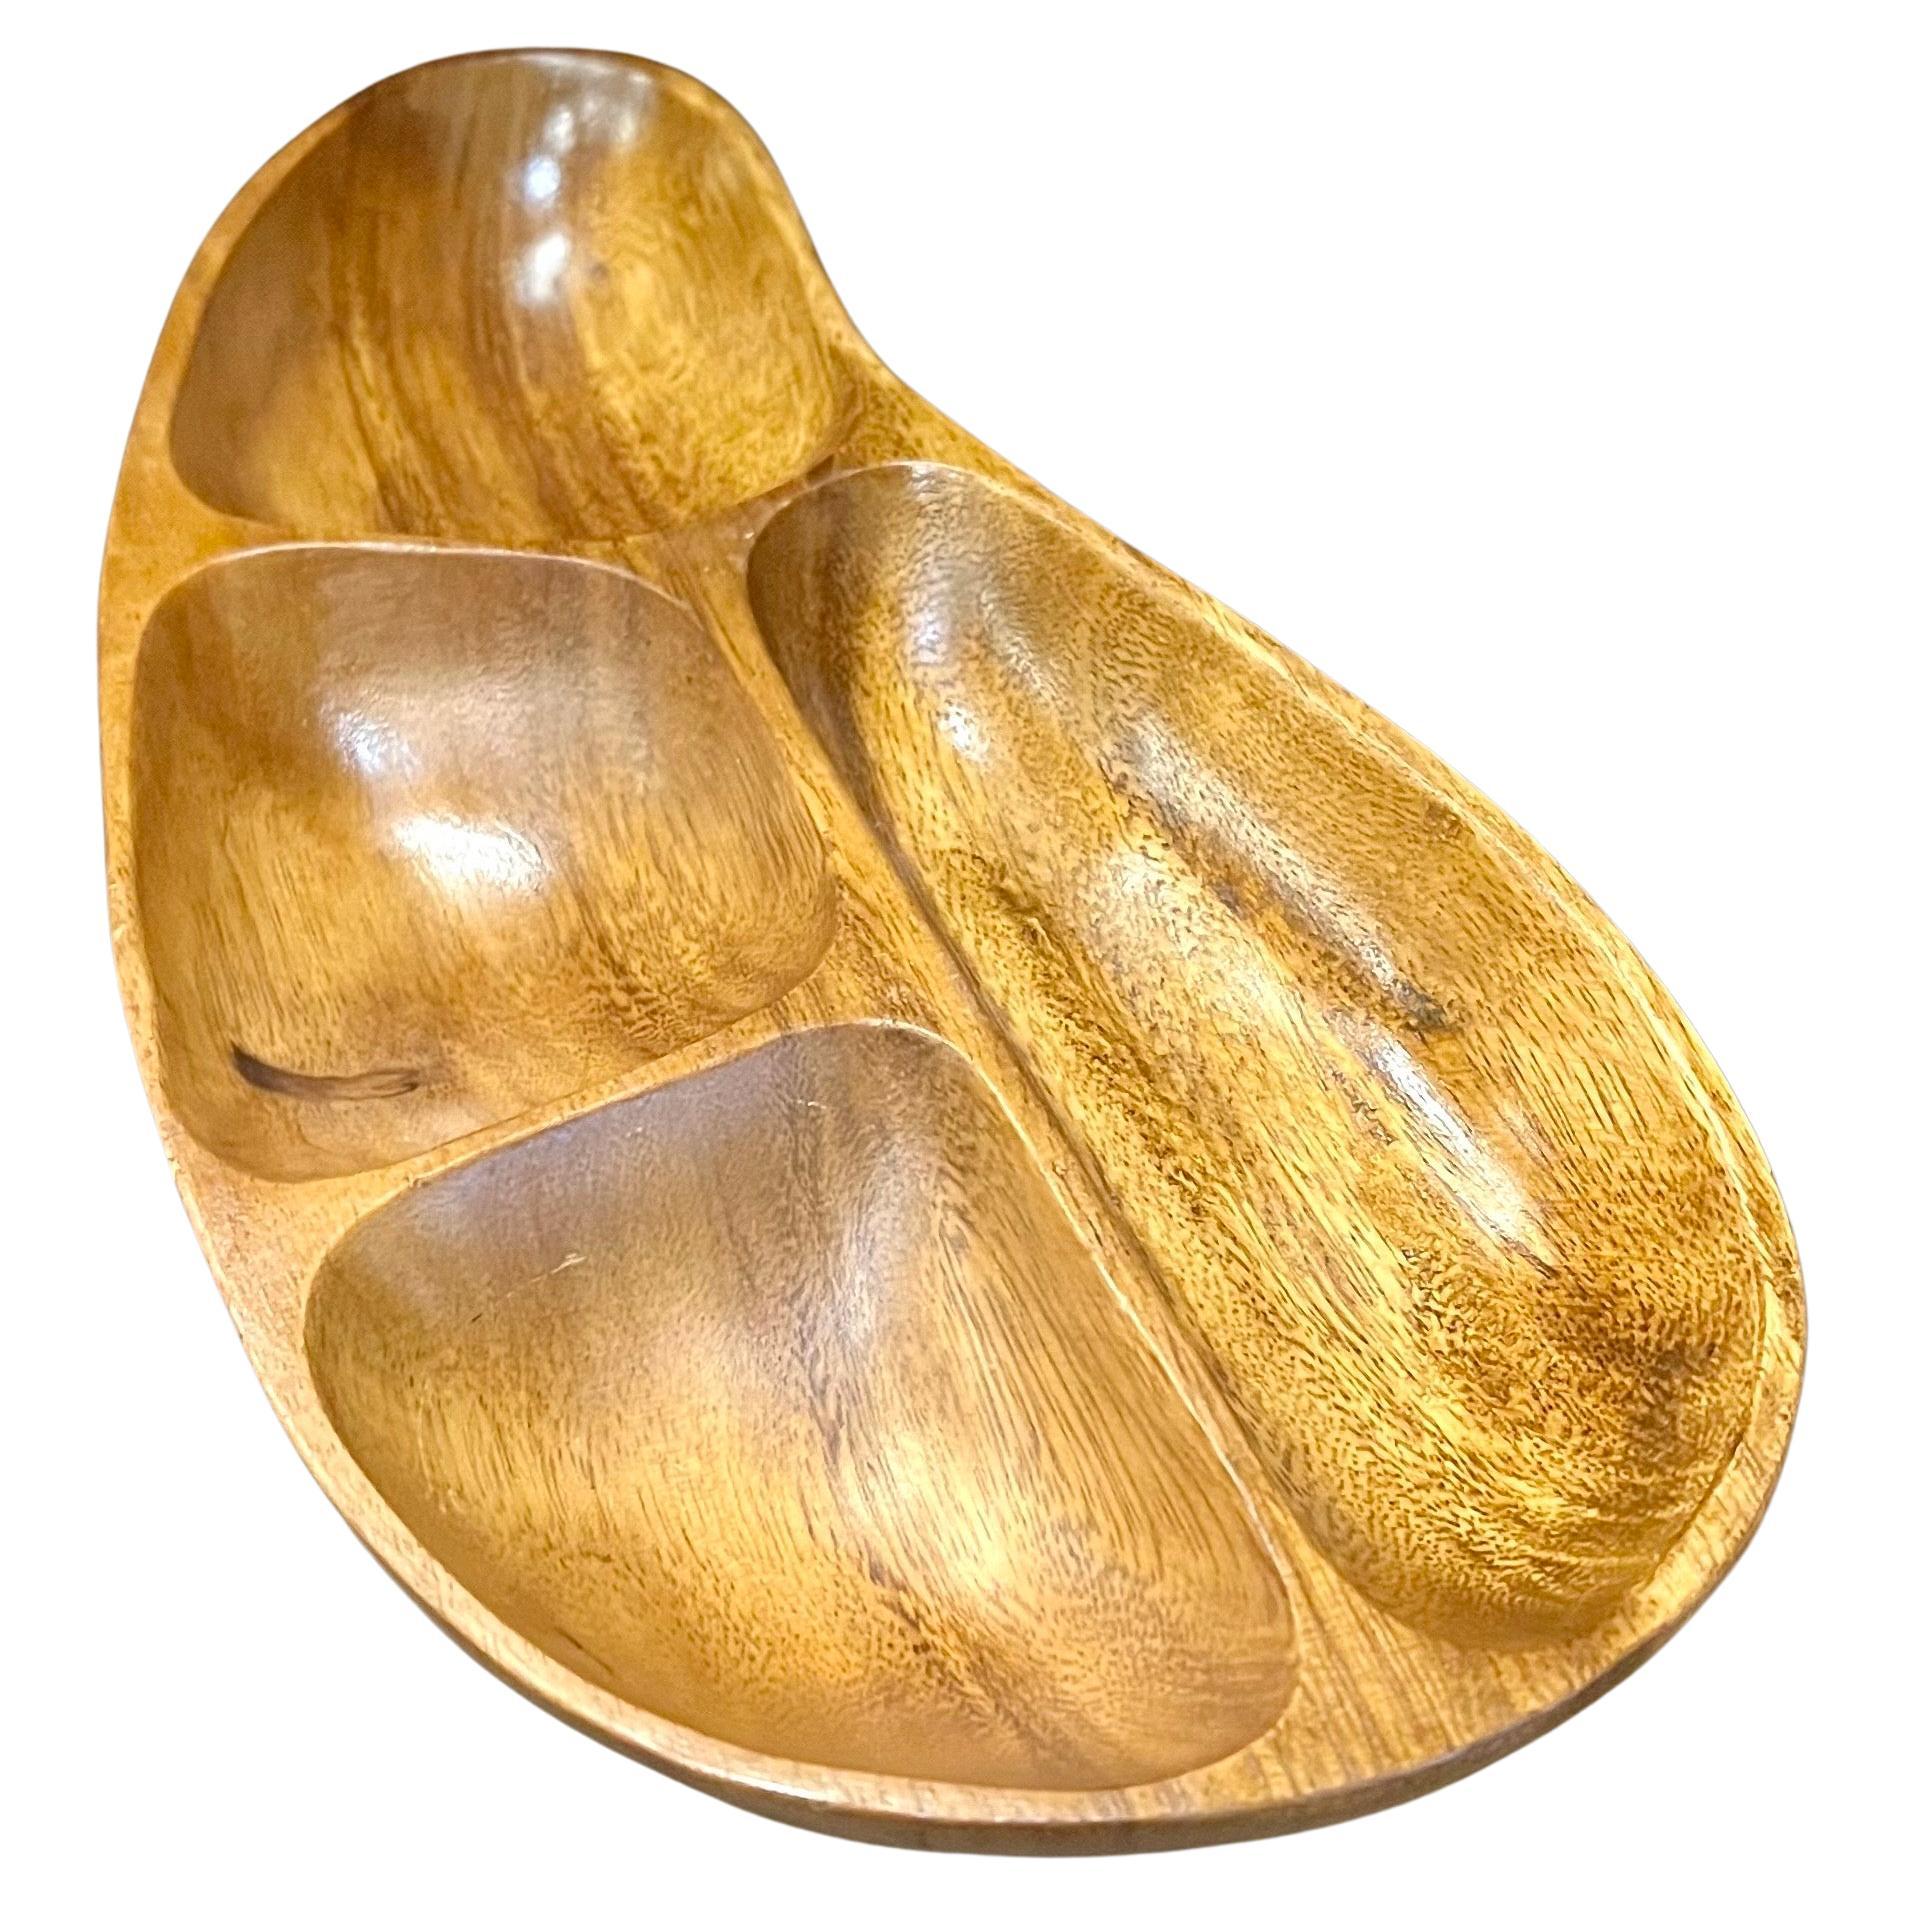 Beautiful shape and condition on this freeform snack Catch it all bowl, circa 1960's hand crafted in the Philipines.